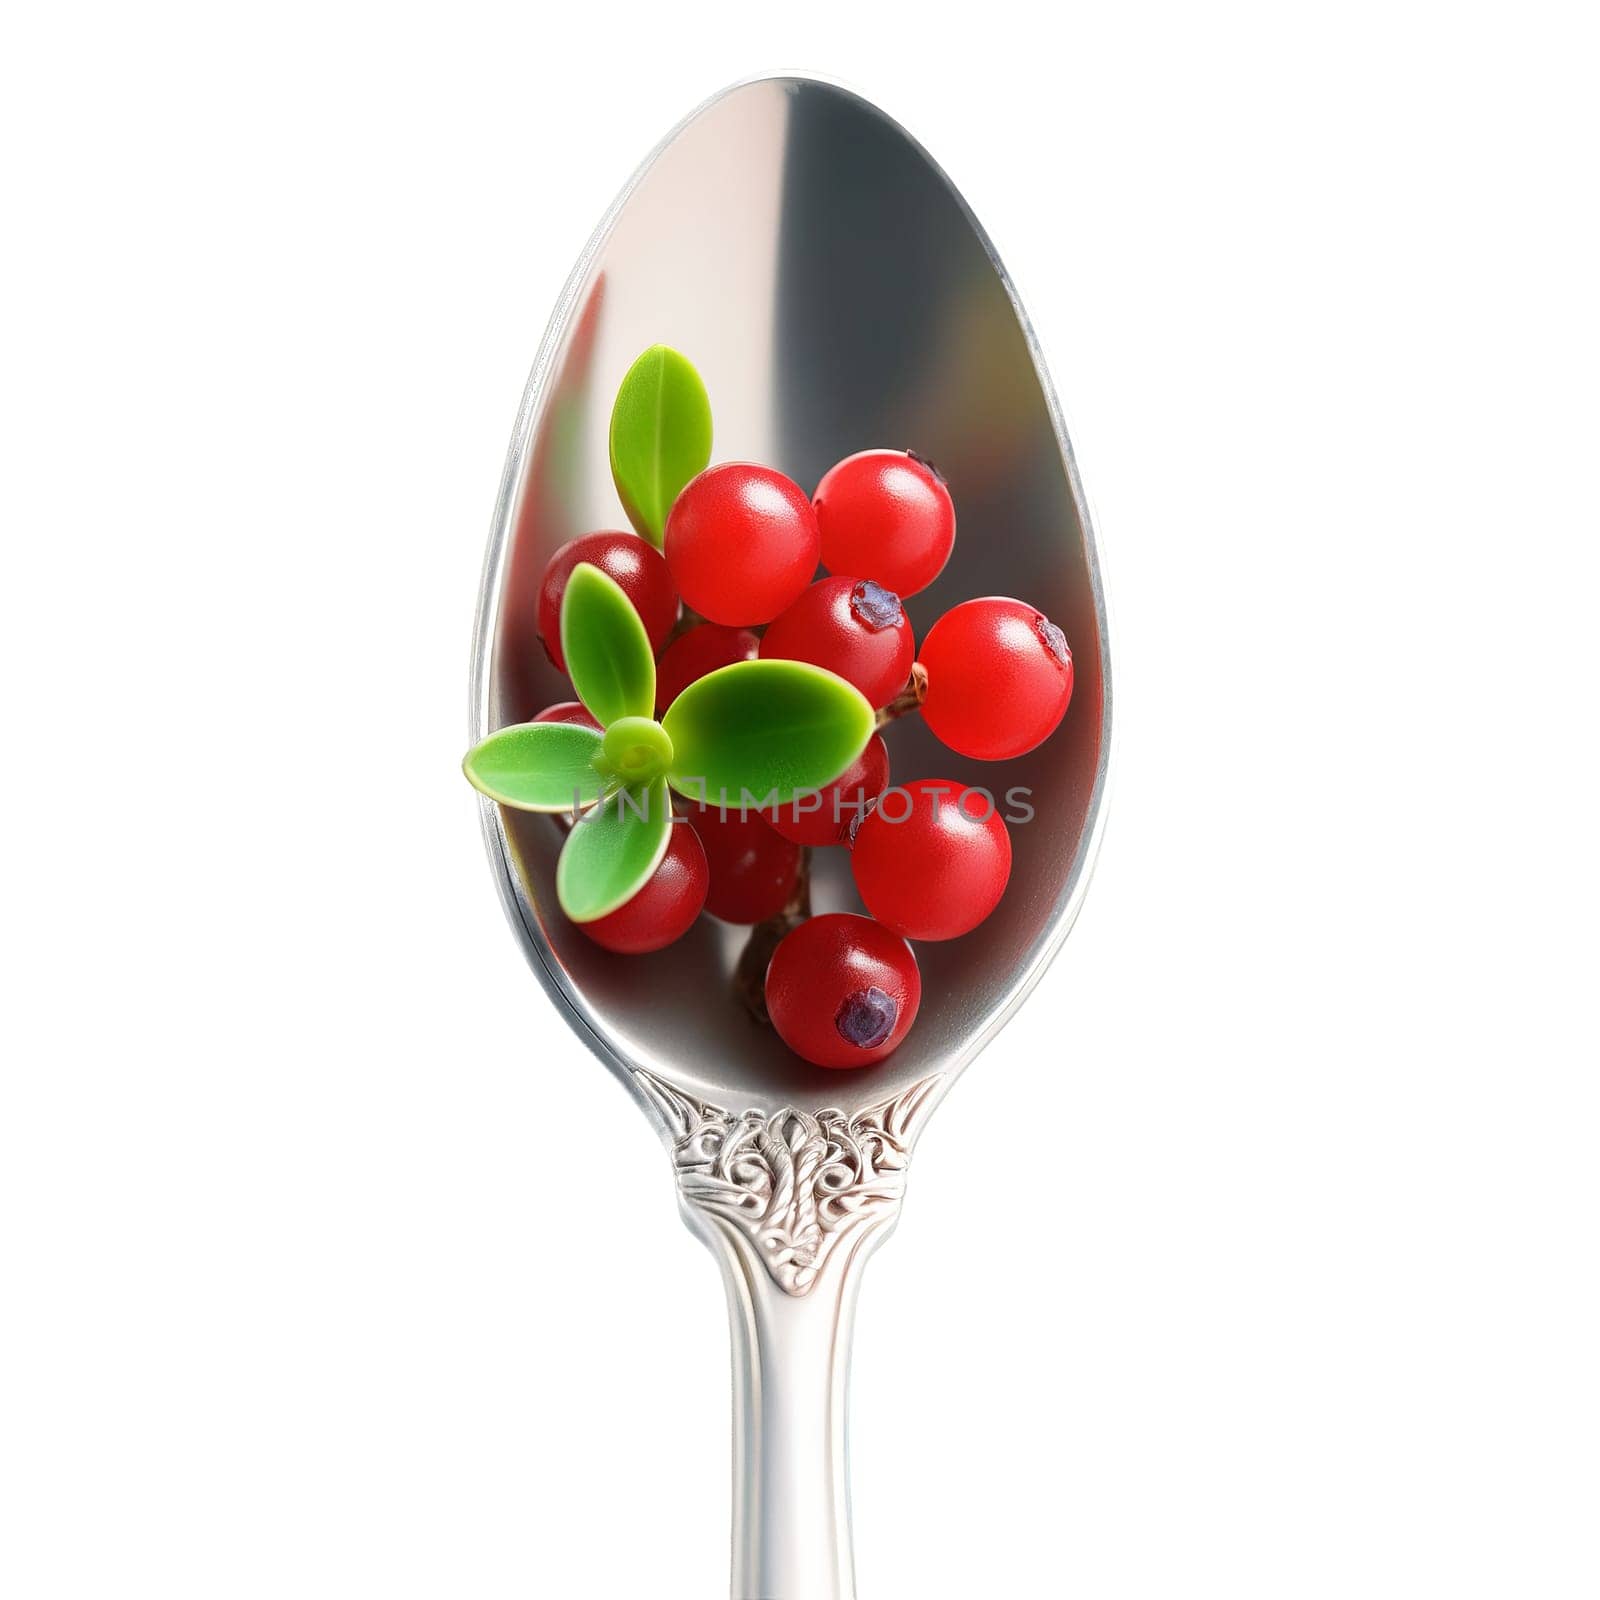 Succulent buffaloberries Shepherdia argentea elegantly balanced on a polished silver spoon their glossy red appearance. Food isolated on transparent background